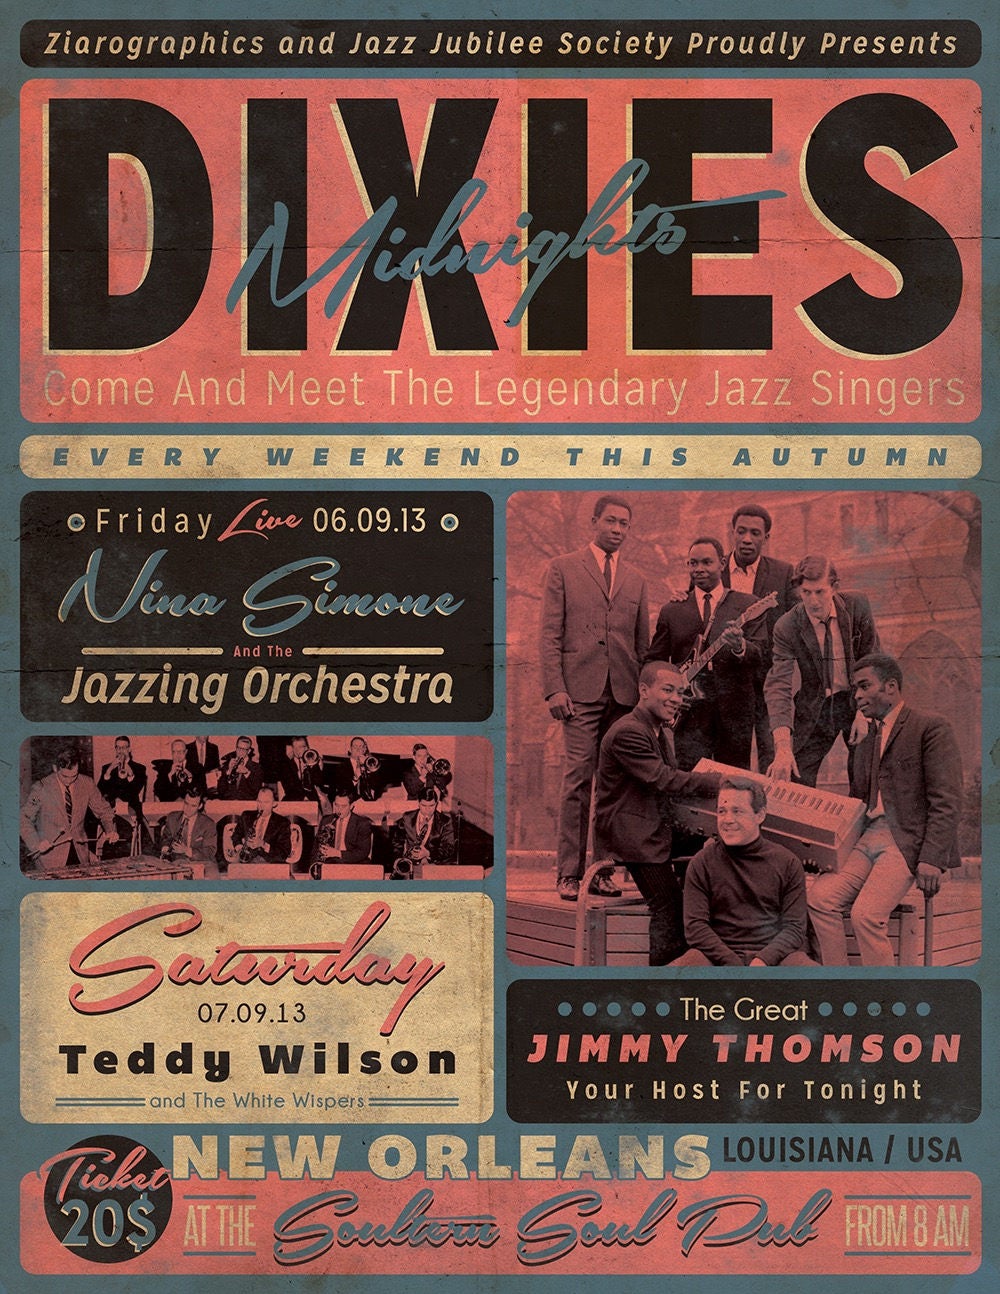 Vintage Music Art Poster - The Dixies - 0583